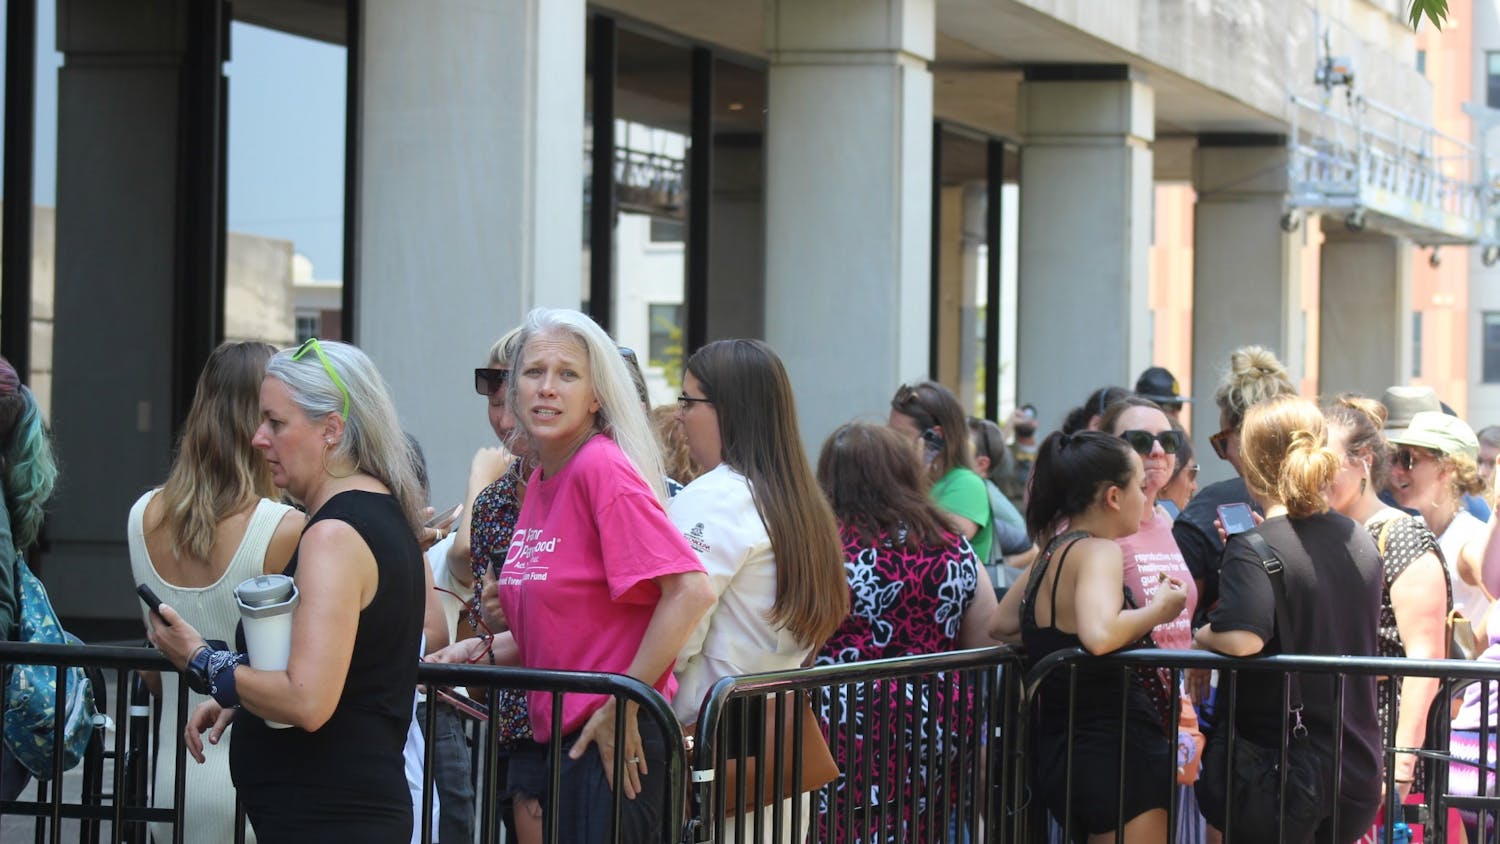 A crowd gathered outside the building where a special House committee met to decide the future of abortion in South Carolina. The committee heard testimony from the public July 7.